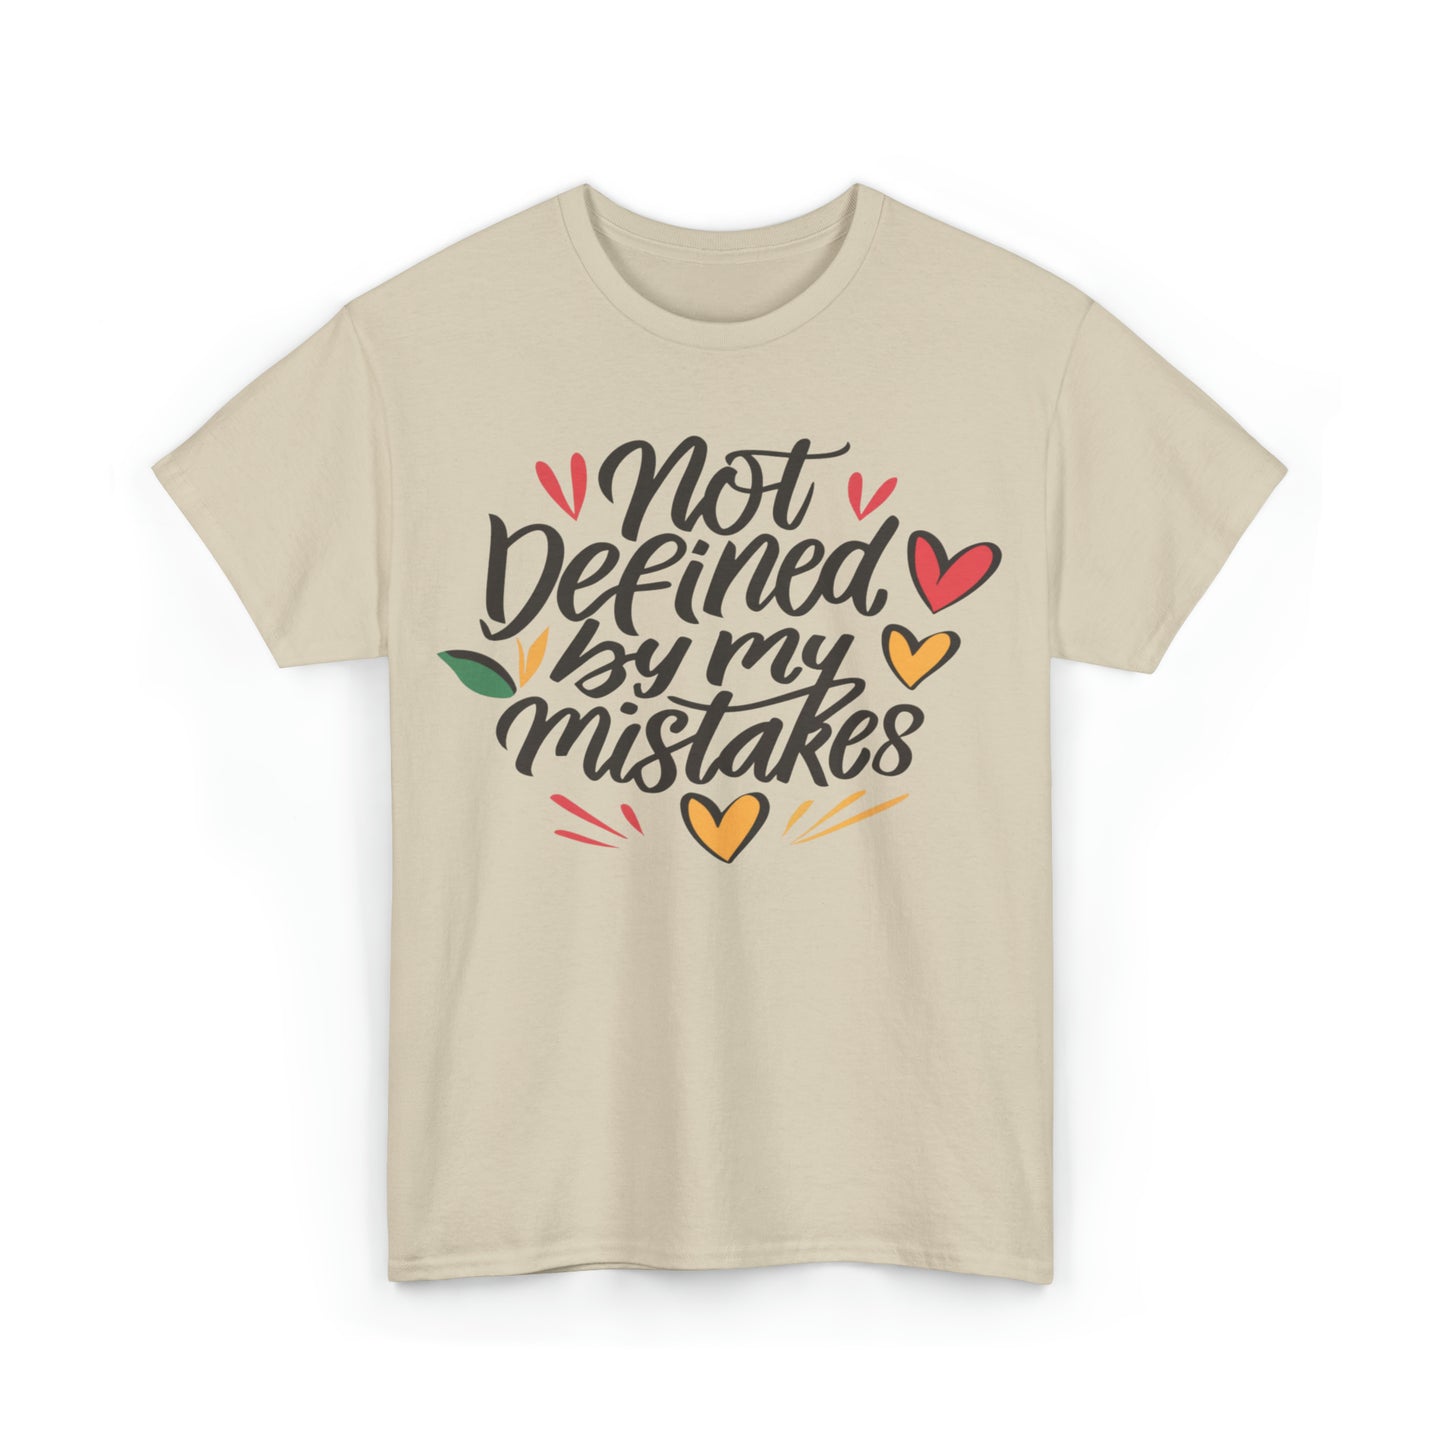 "Not Defined by My Mistakes" T-shirt